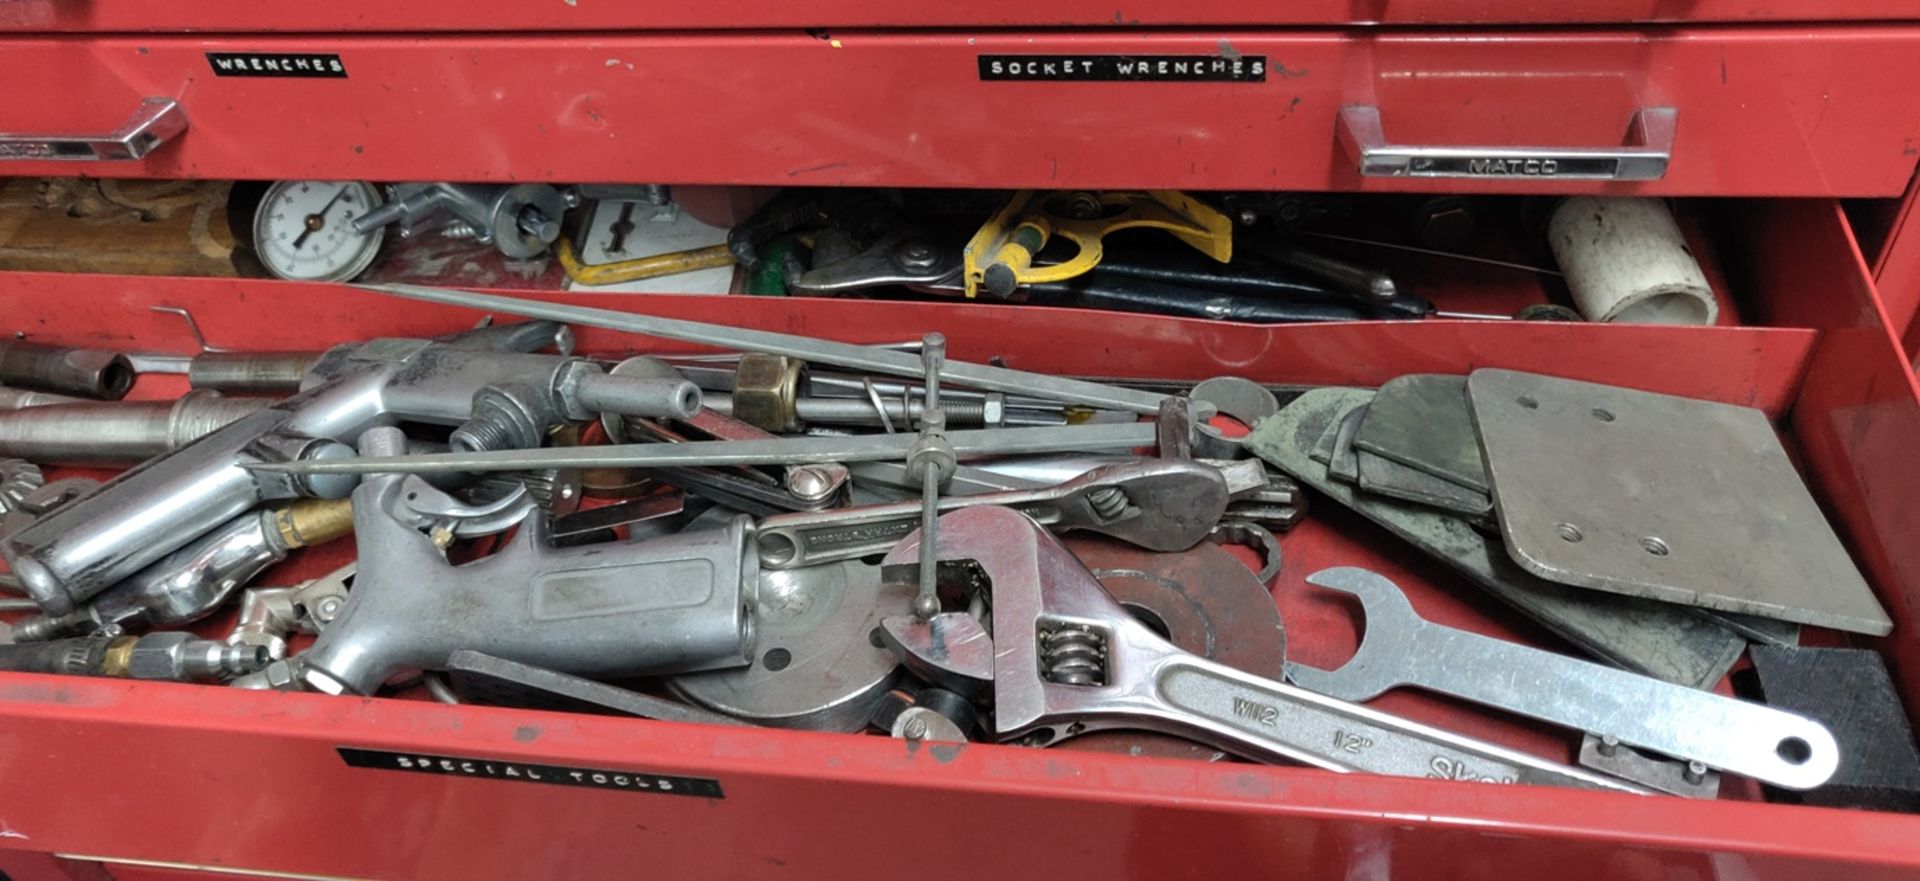 TOOL BOXES W/ LOADS & LOADS OF TOOLS - PLIERS, SCREW DRIVERS, WRENCHES, VICES, FILES, ETC - Image 6 of 13